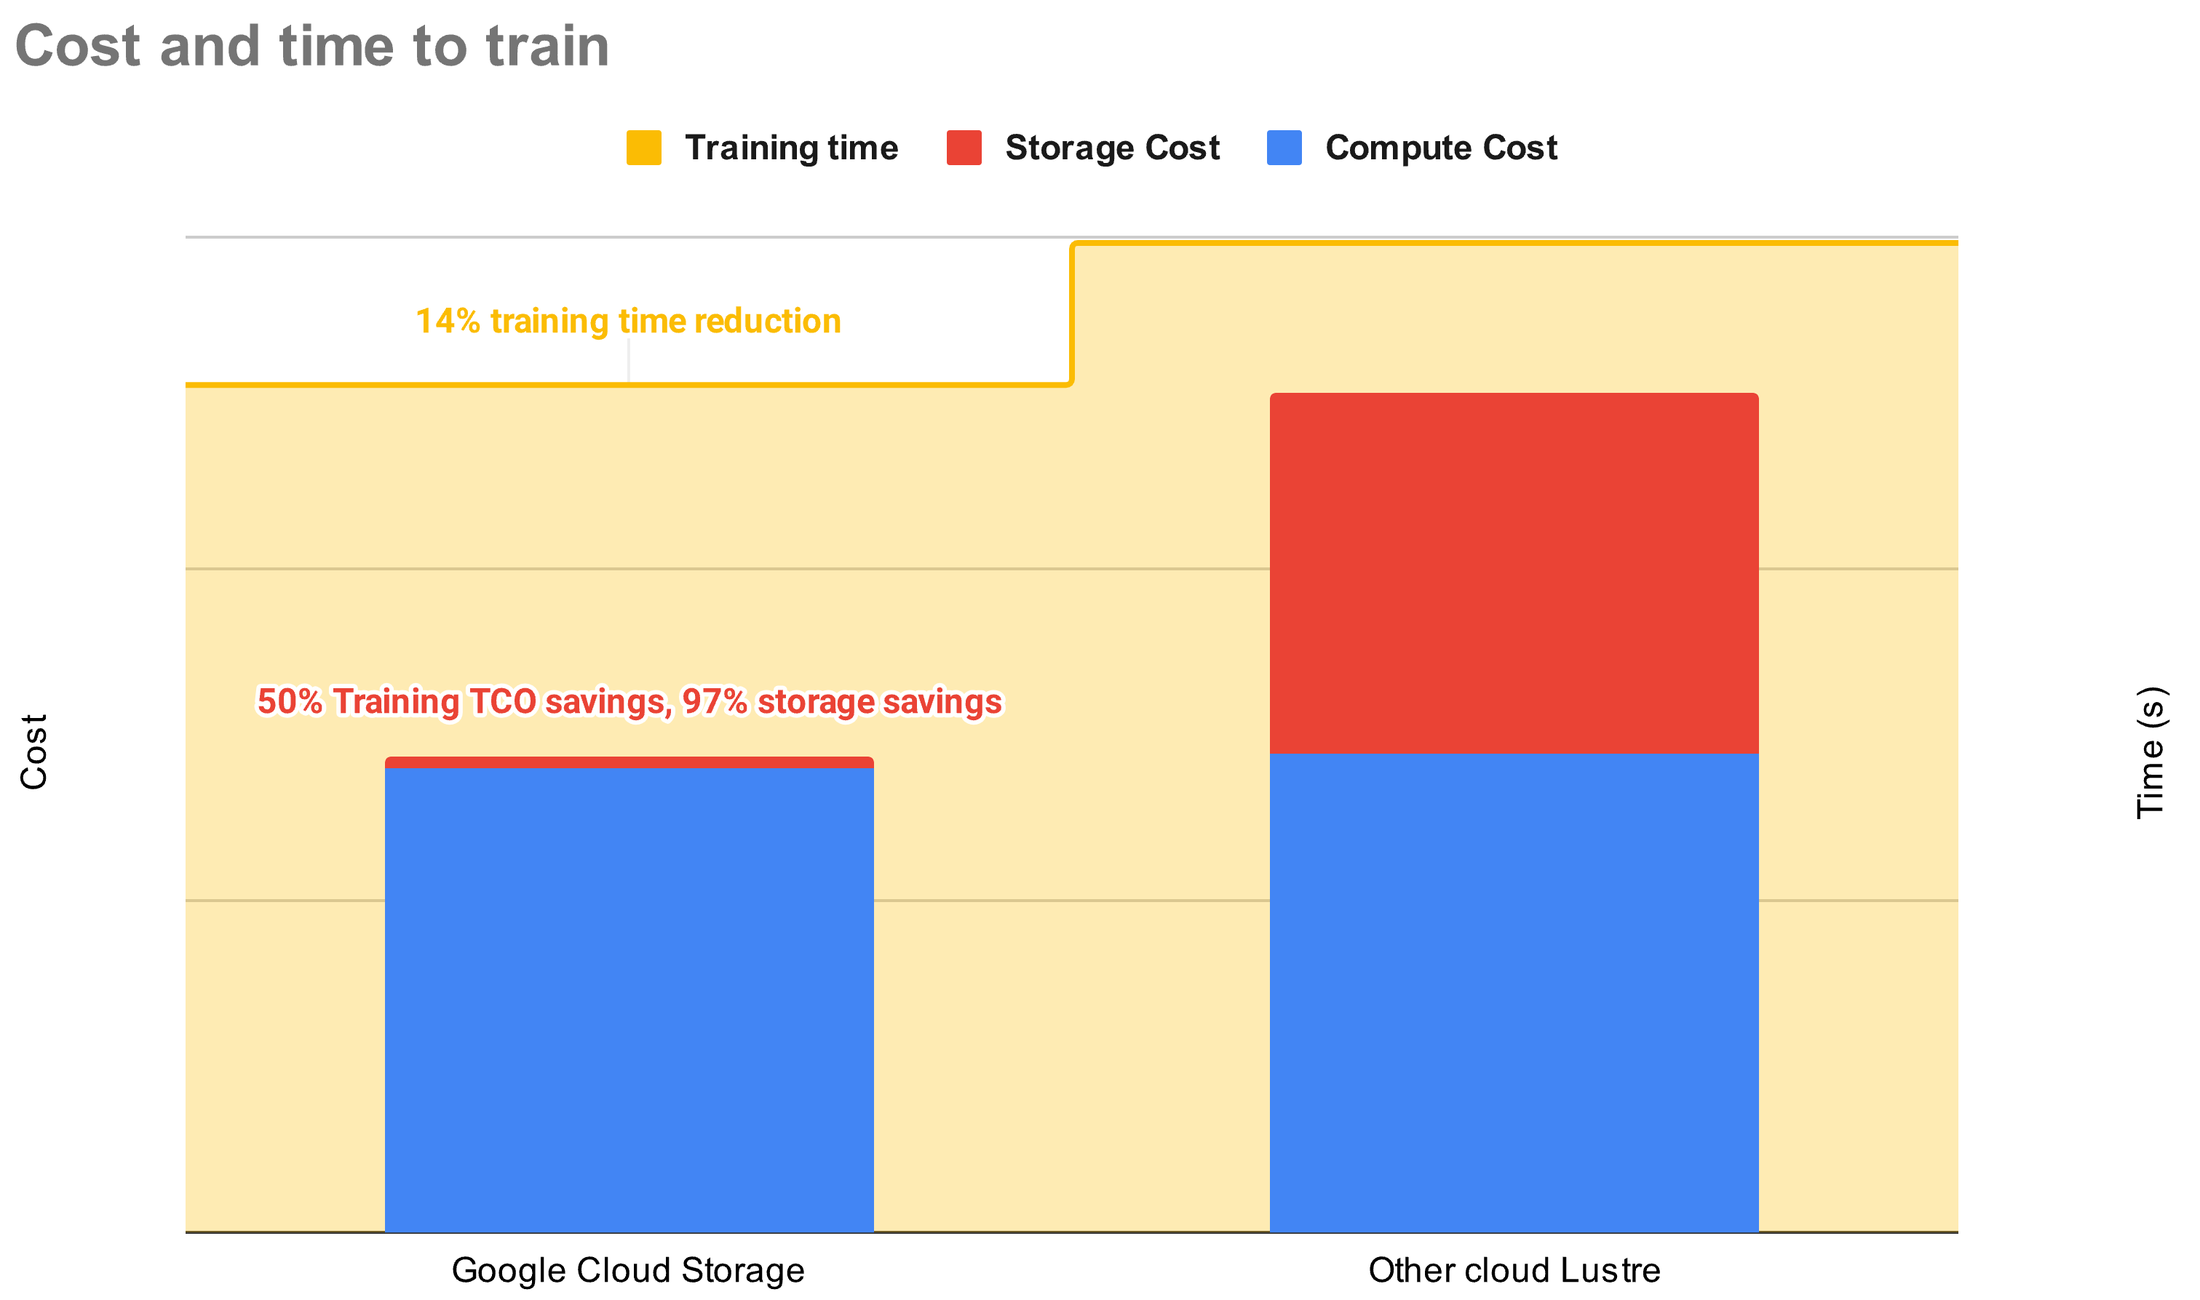 https://storage.googleapis.com/gweb-cloudblog-publish/images/Cost_Time_To_Train.max-2200x2200.png